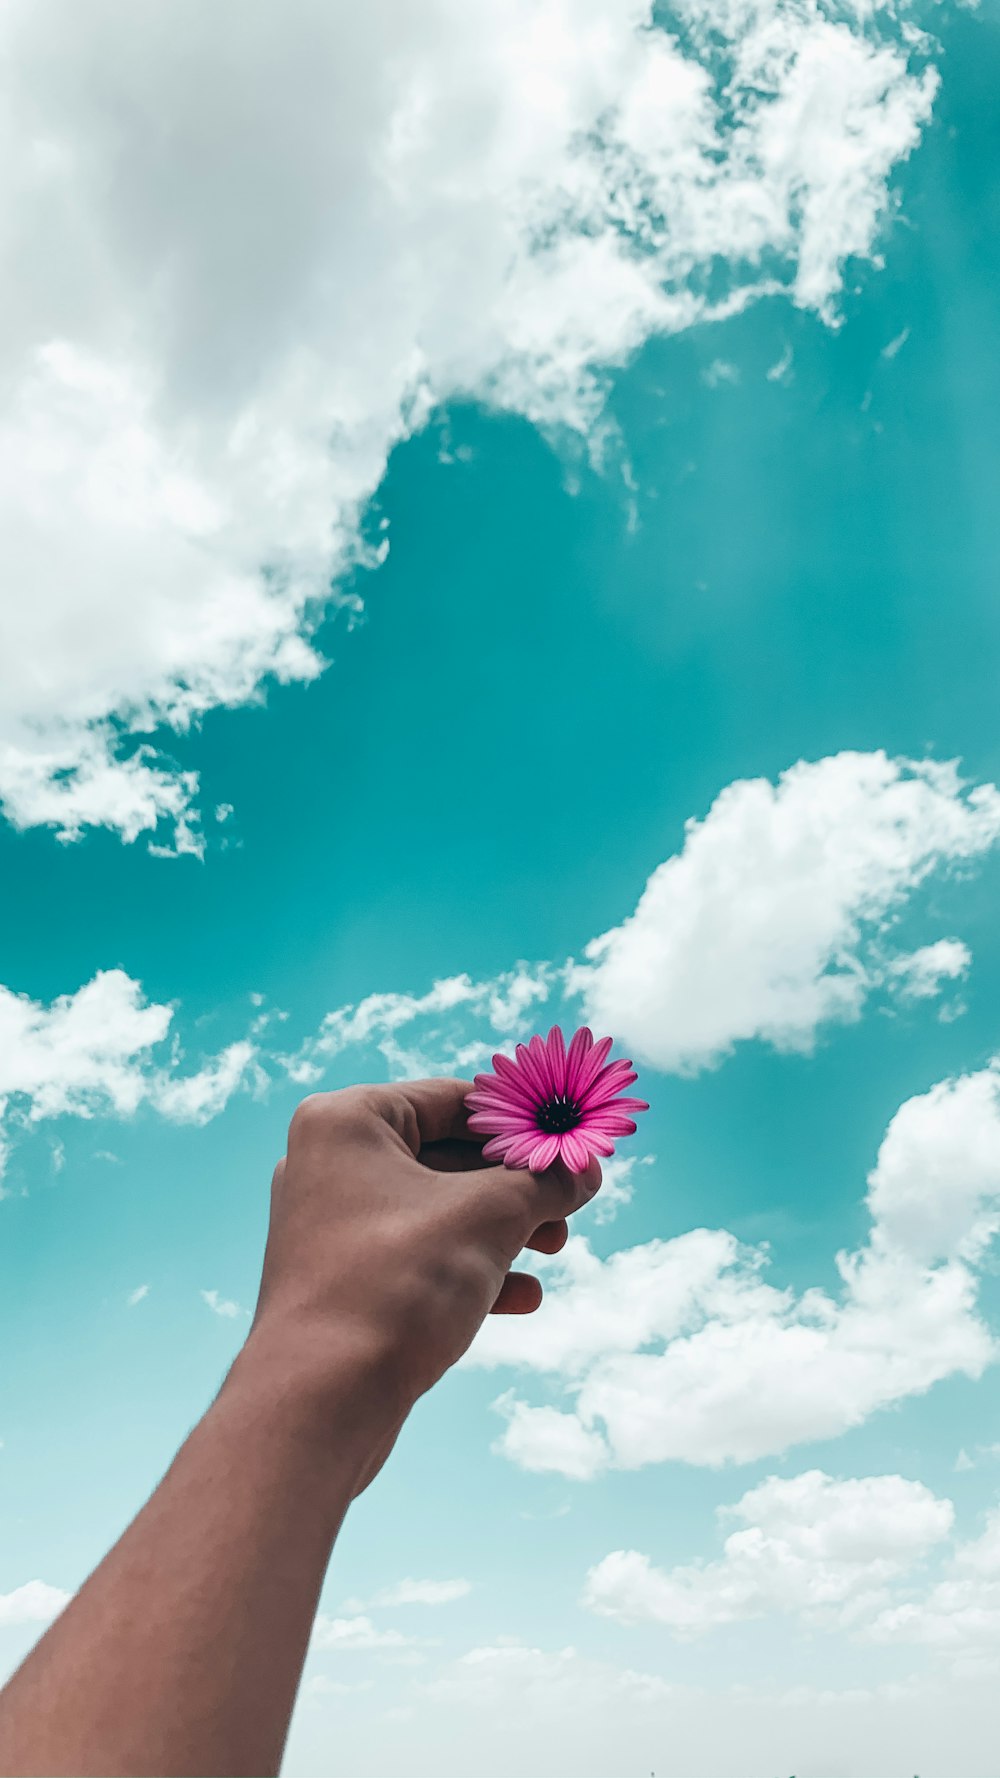 person holding purple flower under blue sky during daytime